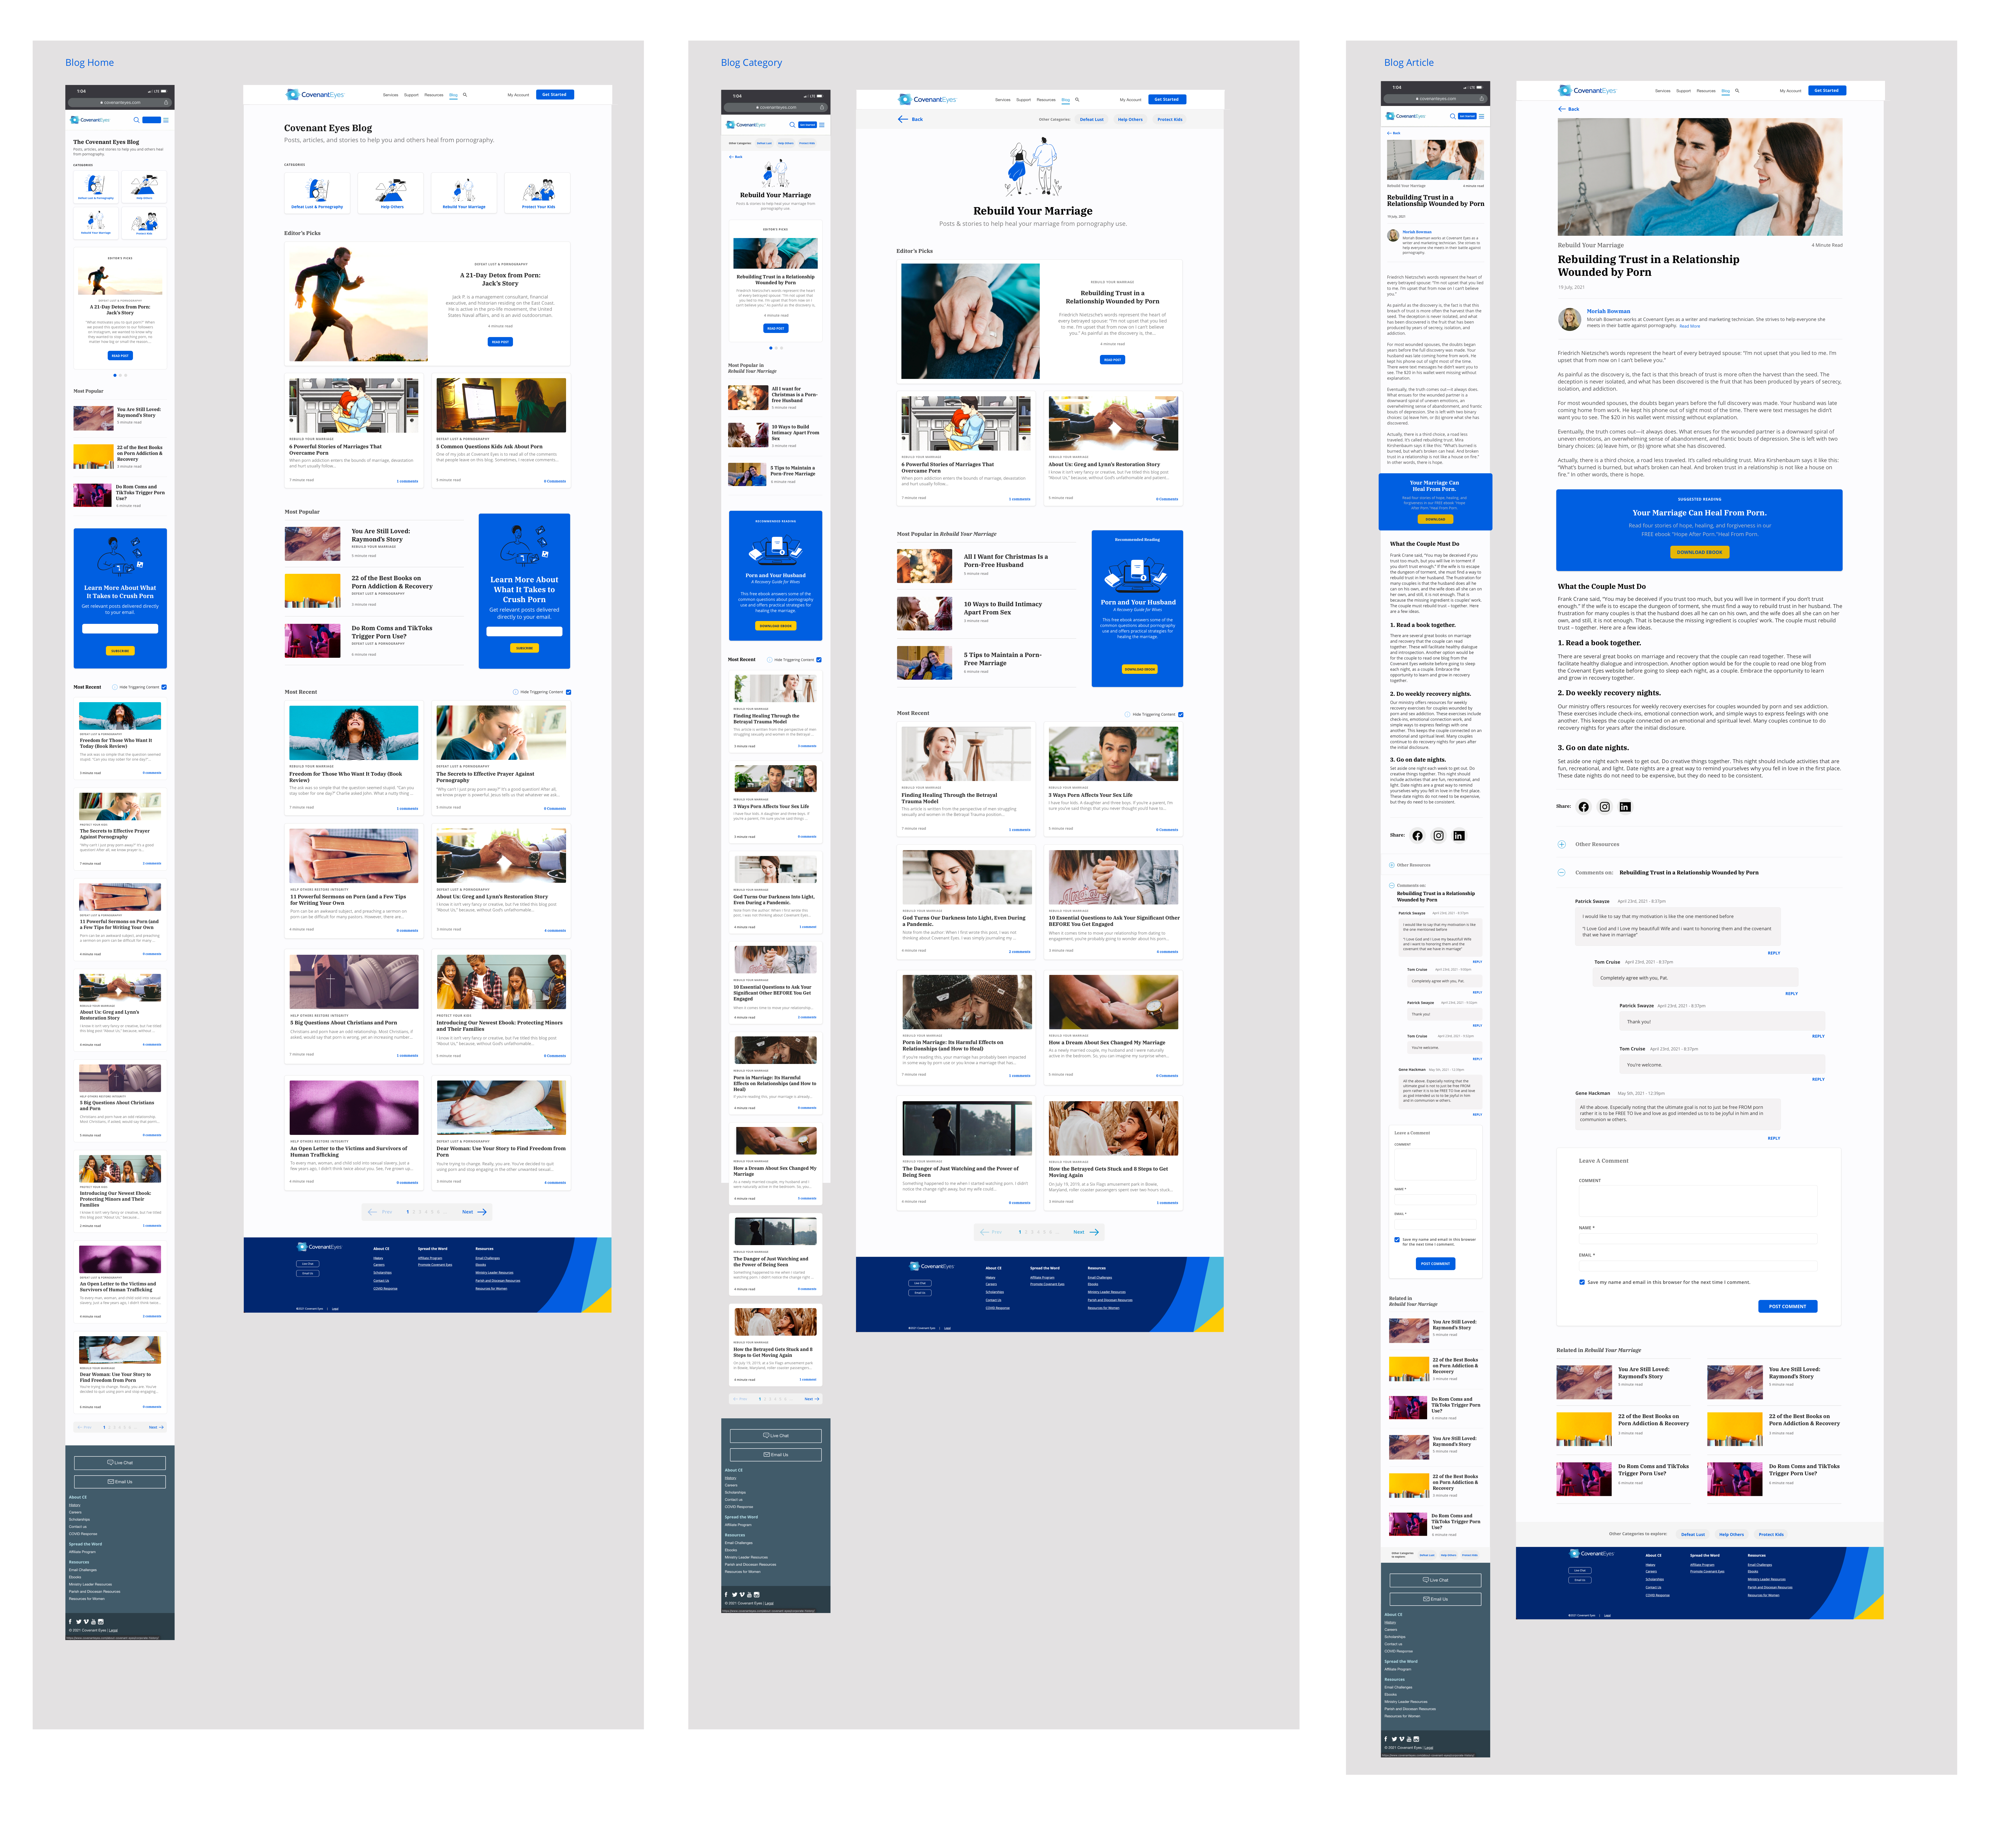 Mobile and desktop design concepts used for usability testing